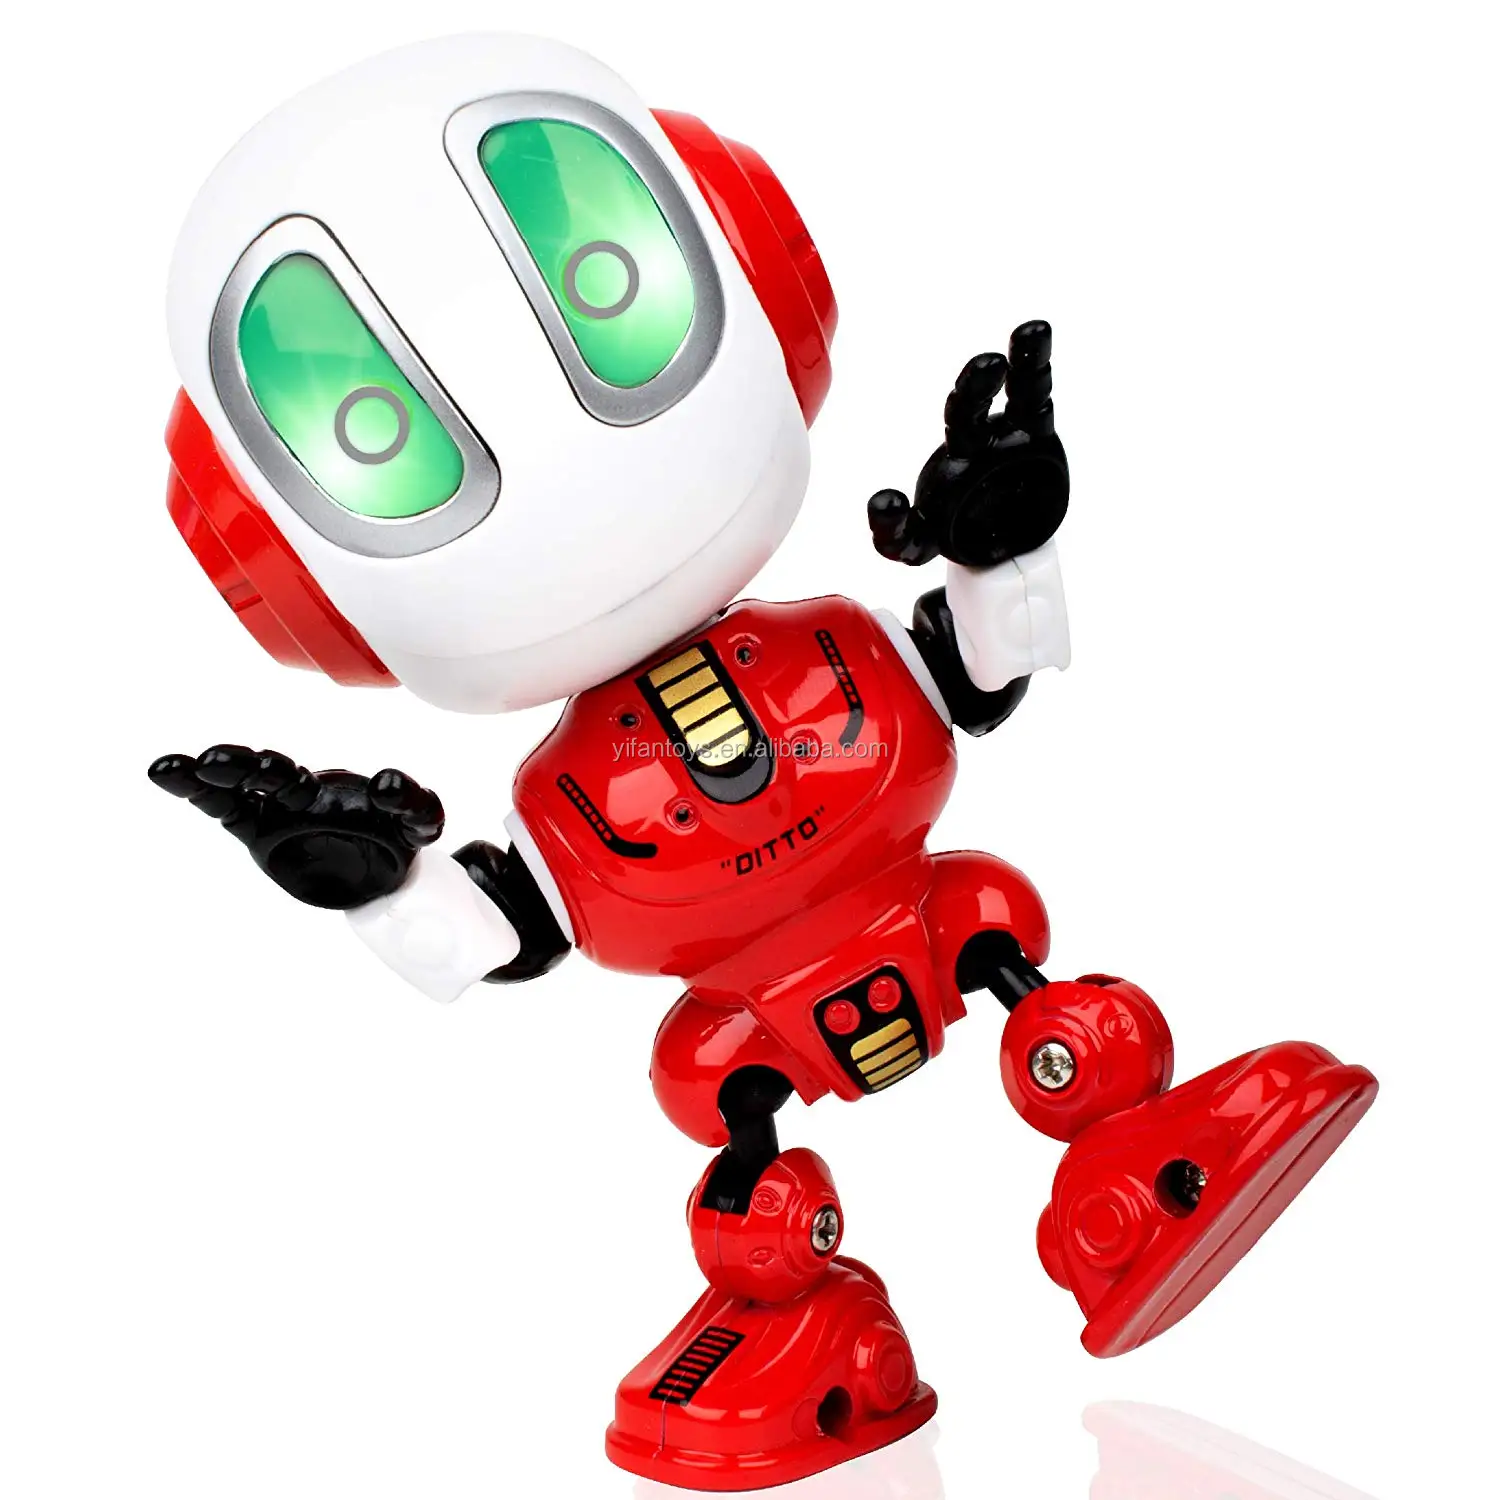 MY66-Q1202 Interactive Voice Charger Robots for Boys or Girls Talking & Alloy Body Mini Robot With Bright LED Eyes